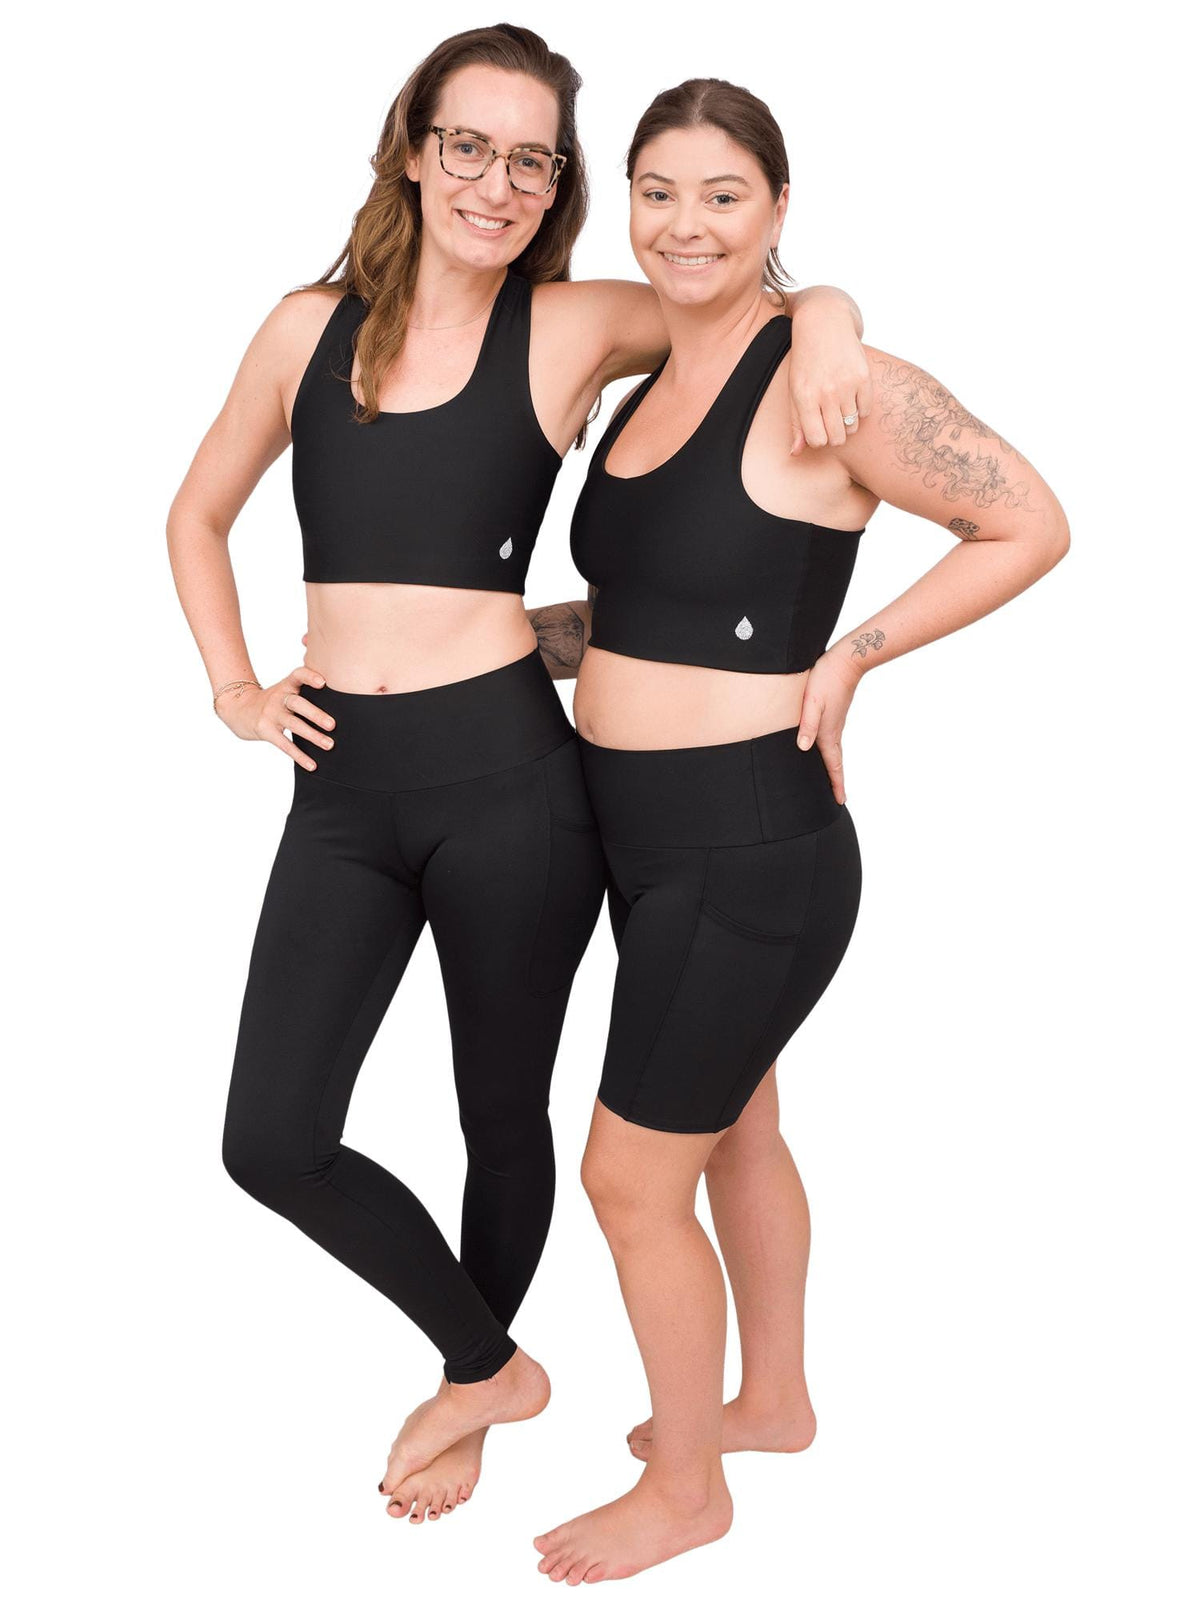 Model: Laura (left) is 5&#39;11&quot;, 150lbs, 34B, and wearing a size M top and M shorts. Camilla (right) is 5&#39;8&quot;, 180 lbs, 36B and wearing a size L shorts and L top.